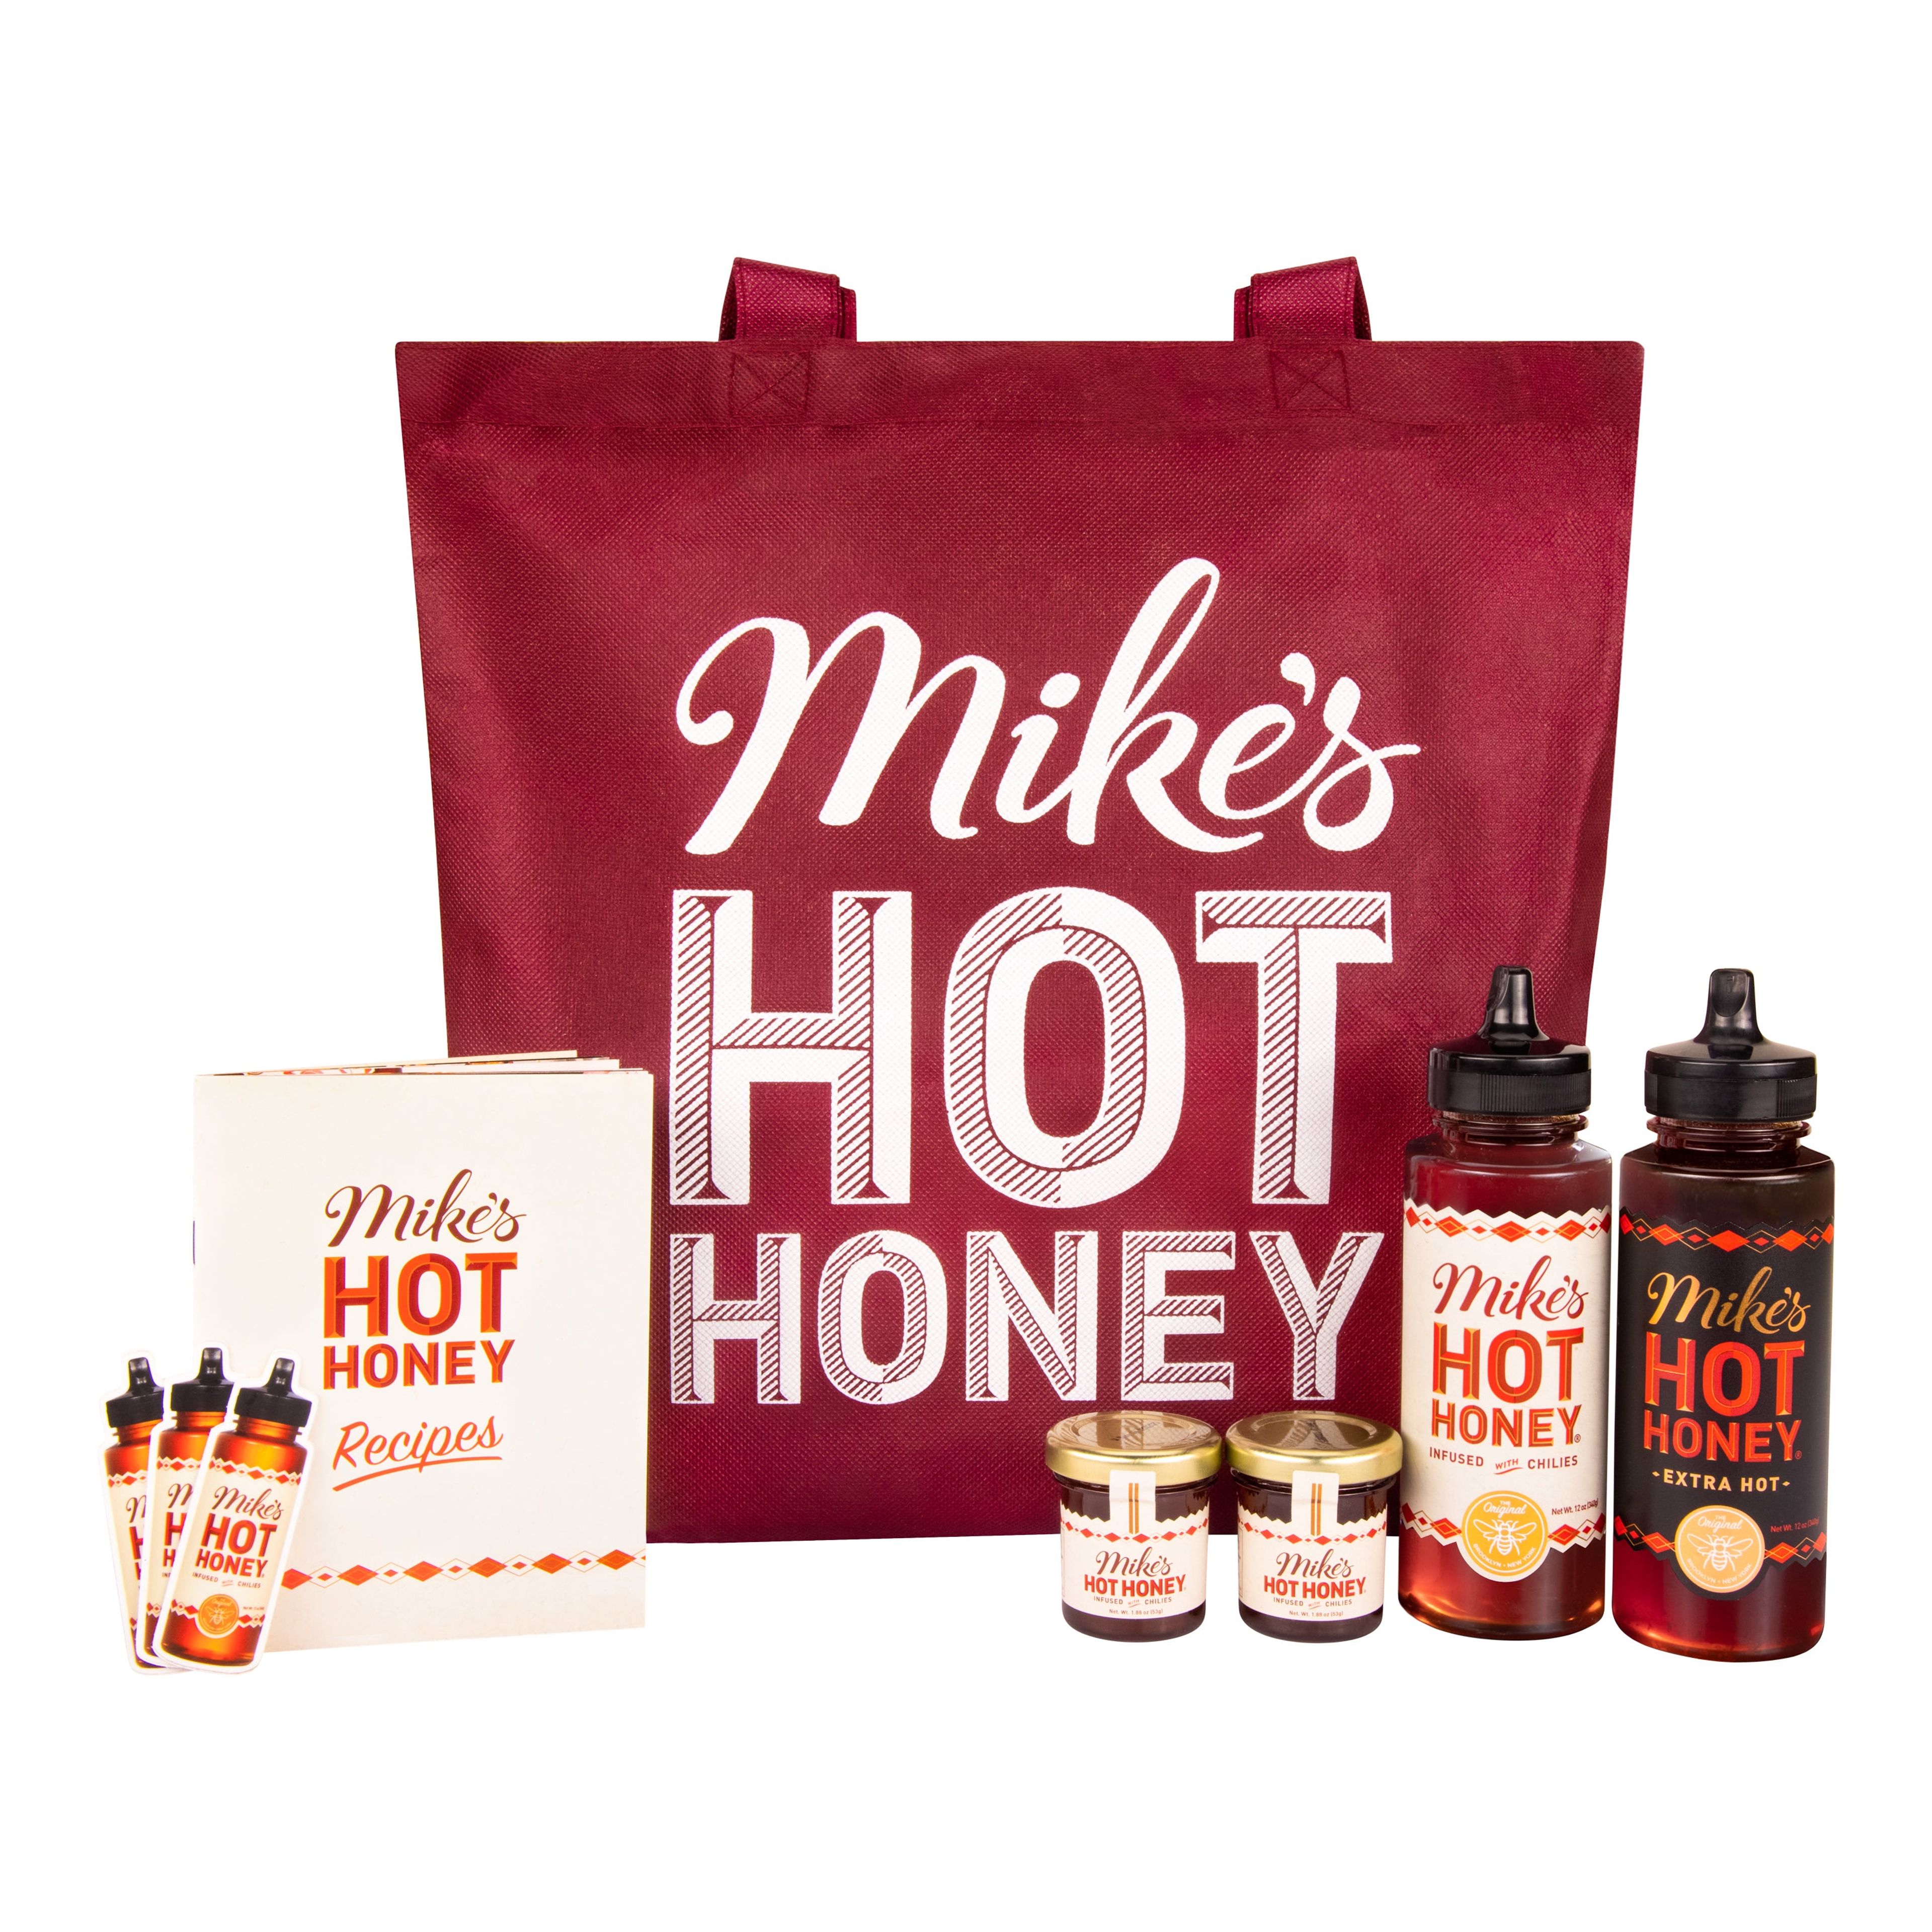 www.mikeshothoney.com/products/mikes-hot-honey-gift-set